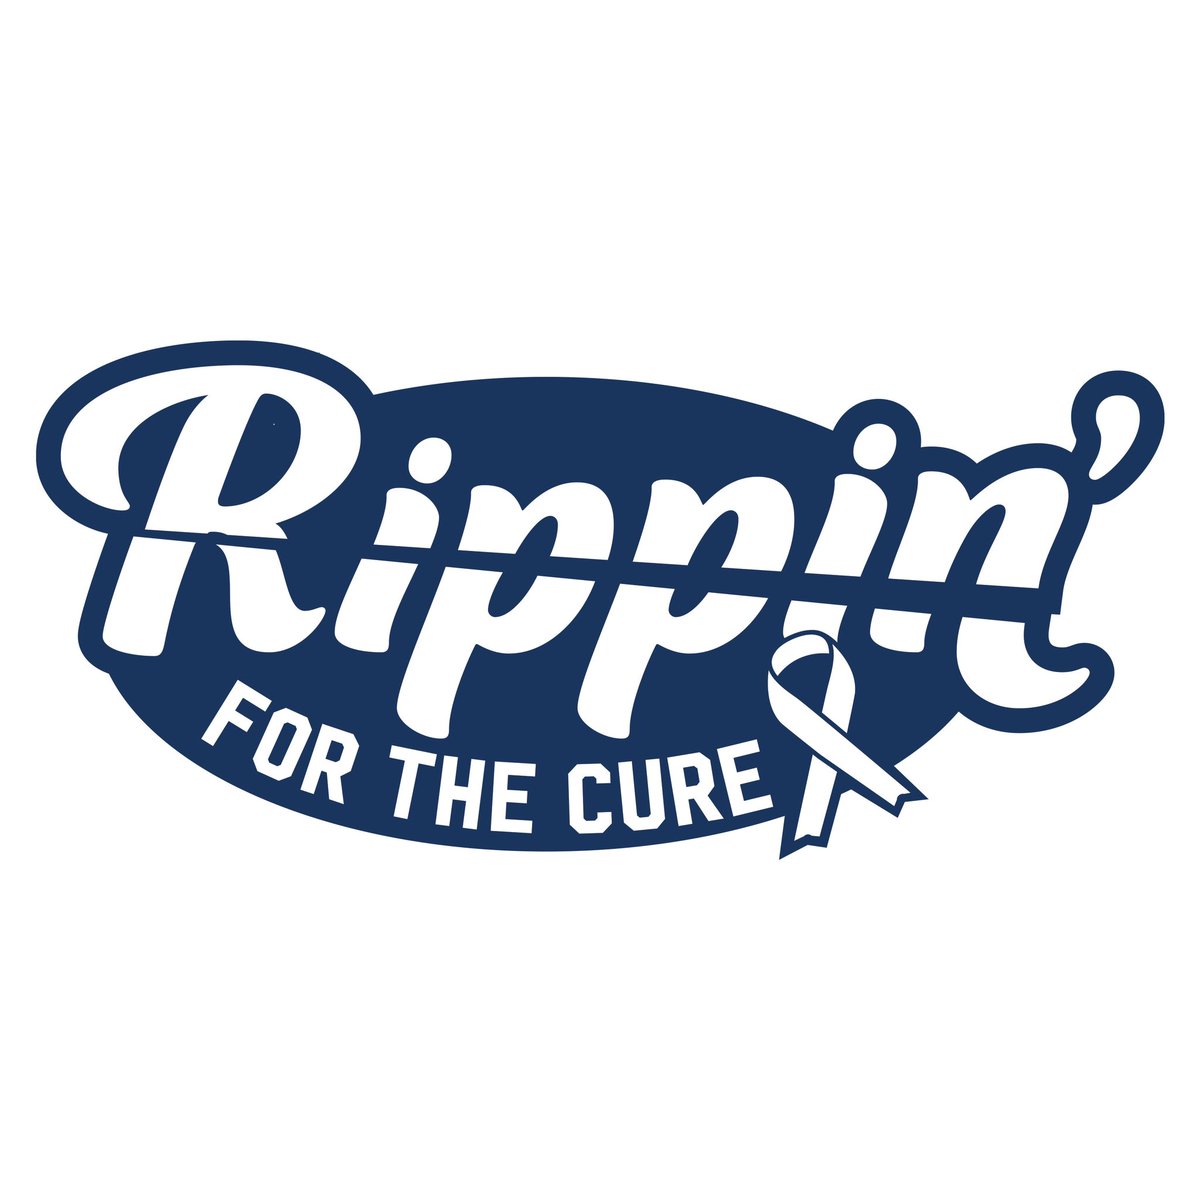 Just a reminder of how fantastic this hobby community is. With just over two weeks to go, #RippinForTheCure officially surpassed $20K. Currently we are $350 from $22K… I can smell $25K. Help get us one step closer. Donate - rippinforthecure.com